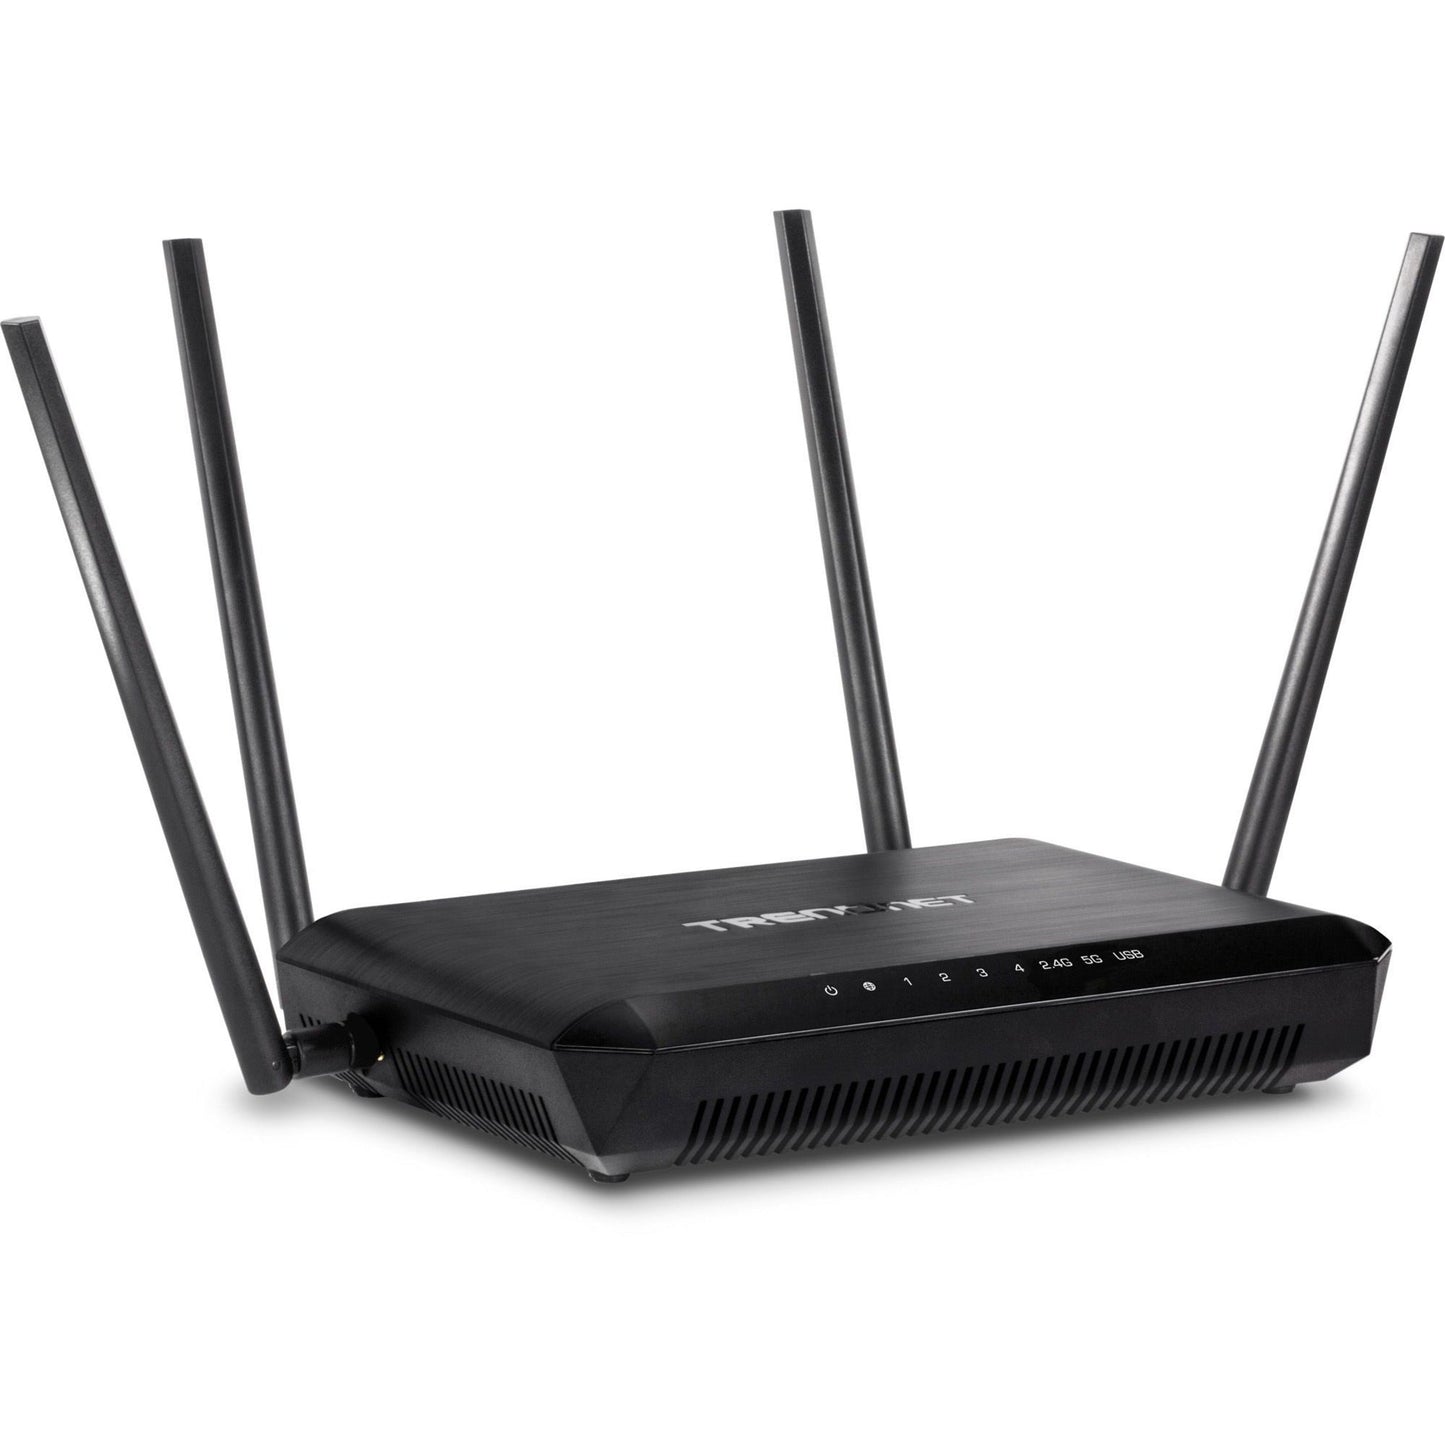 TRENDnet AC2600 MU-MIMO Wireless Gigabit Router Increase WiFi Performance WiFi Guest Network Gaming-Internet-Home Router Beamforming 4K streaming Quad Stream Dual Band Router Black TEW-827DRU